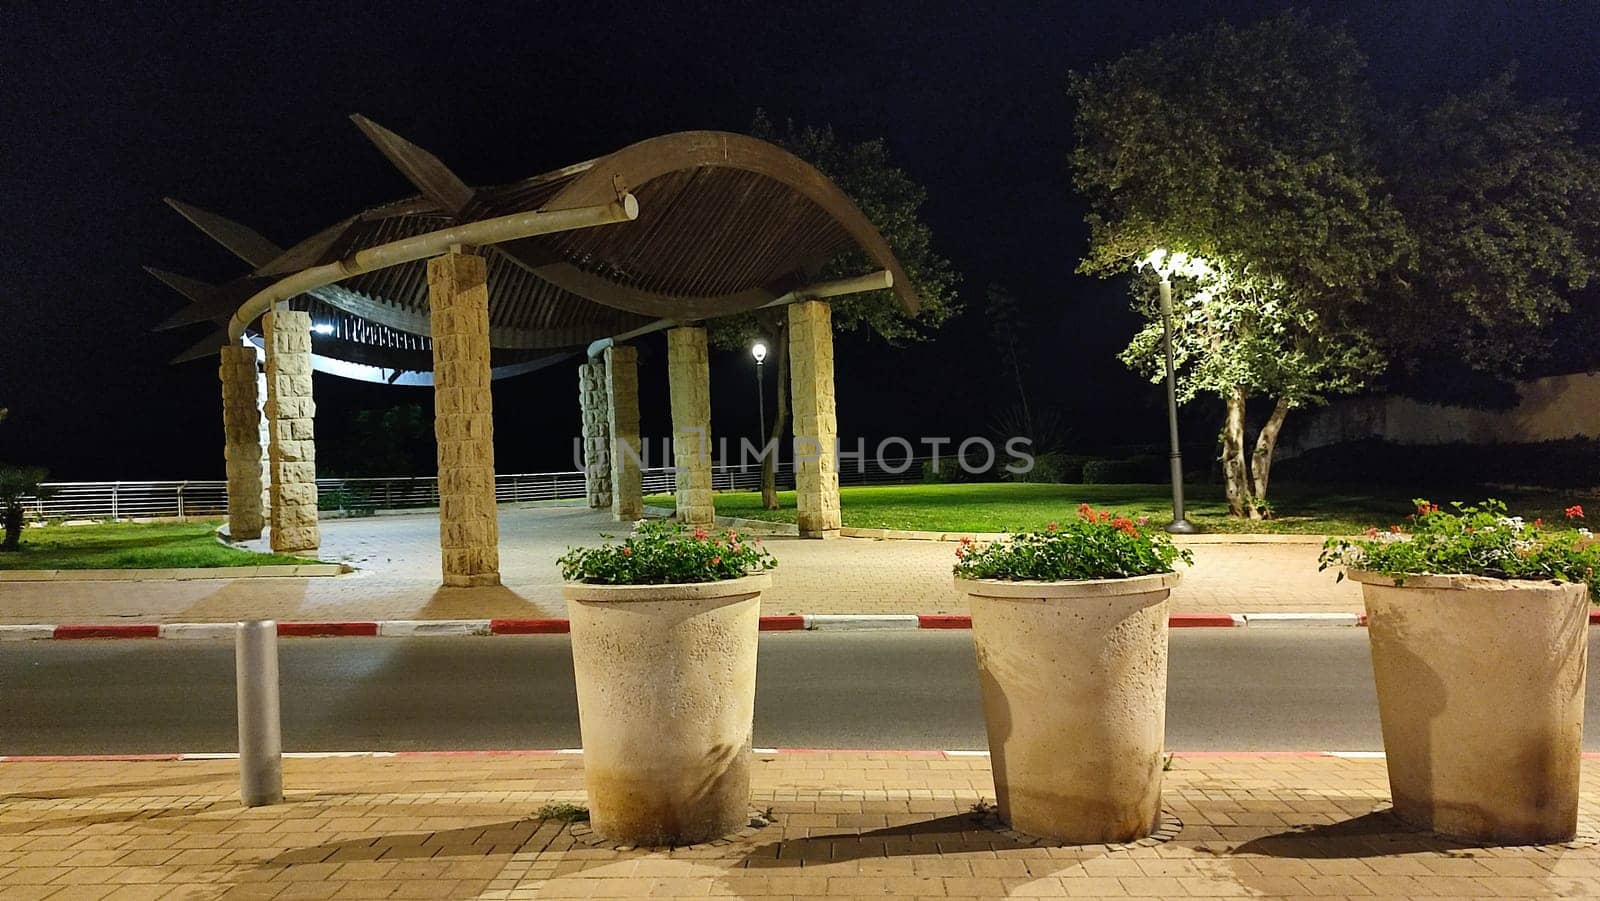 large flower vases outdoors in the city, night decorative landscaping. High quality photo